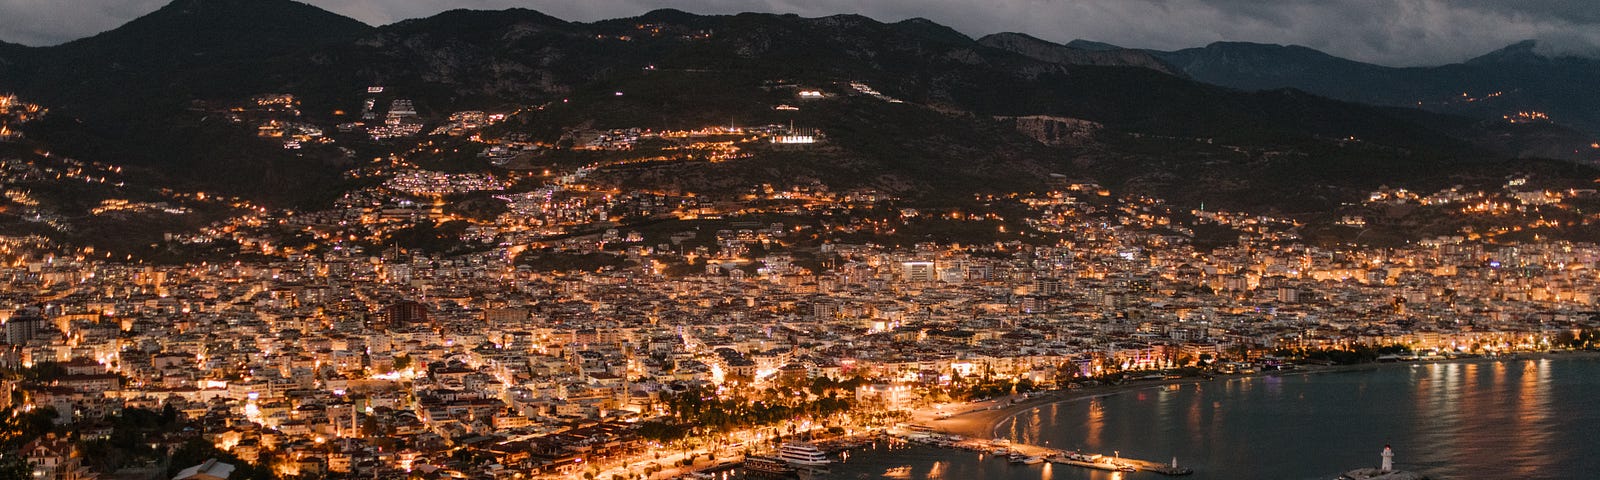 A picturesque image of a coastal town at night with lights shining.